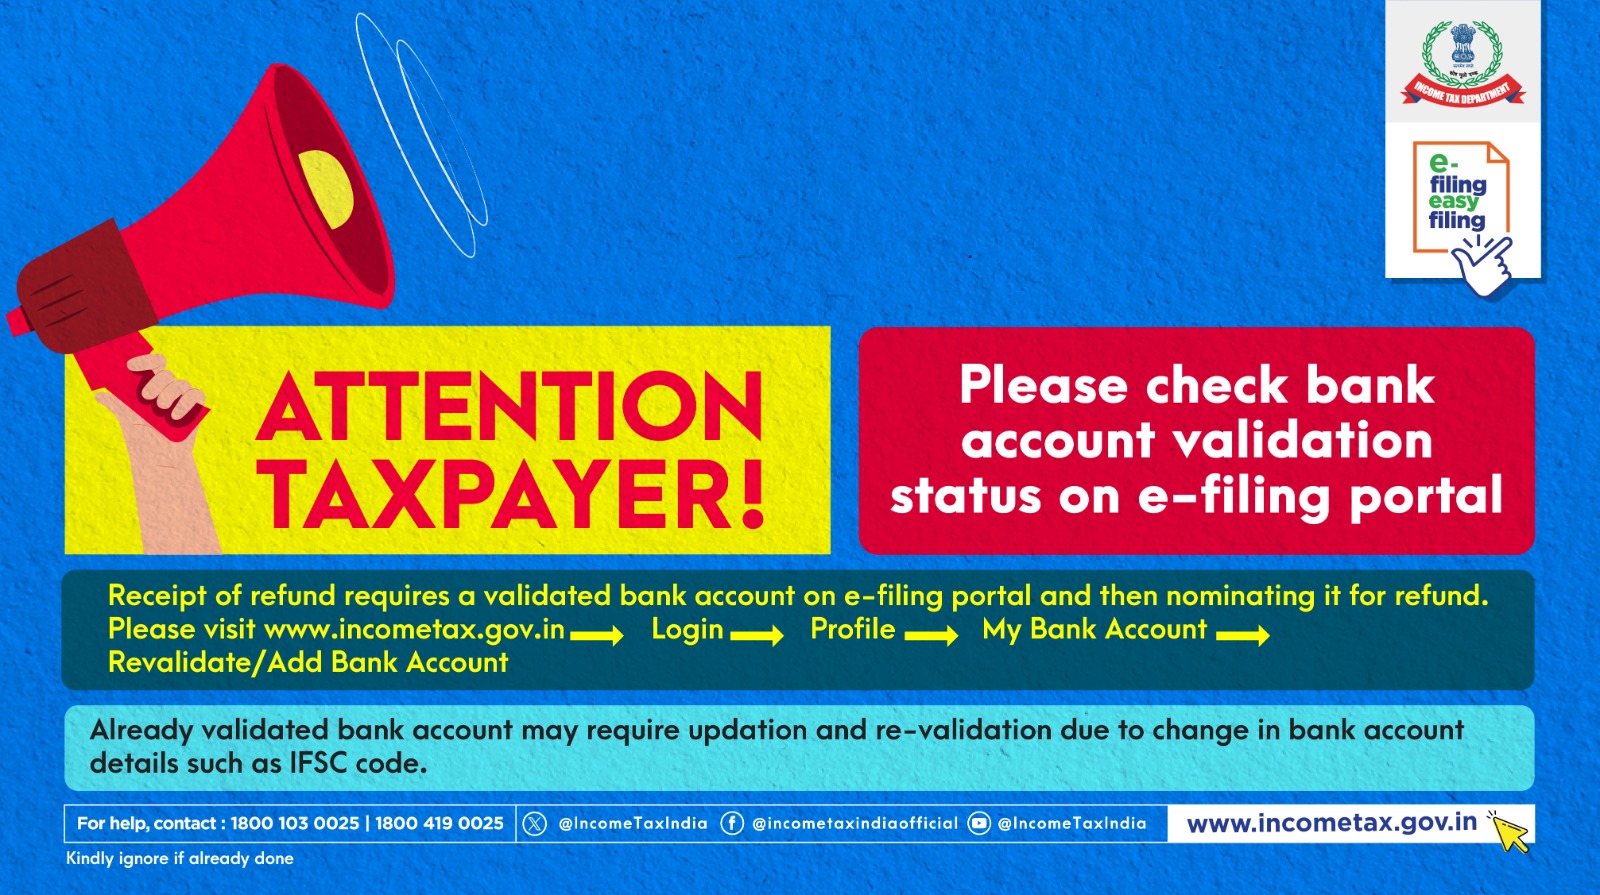 The advisory has directed taxpayers to check bank validation for